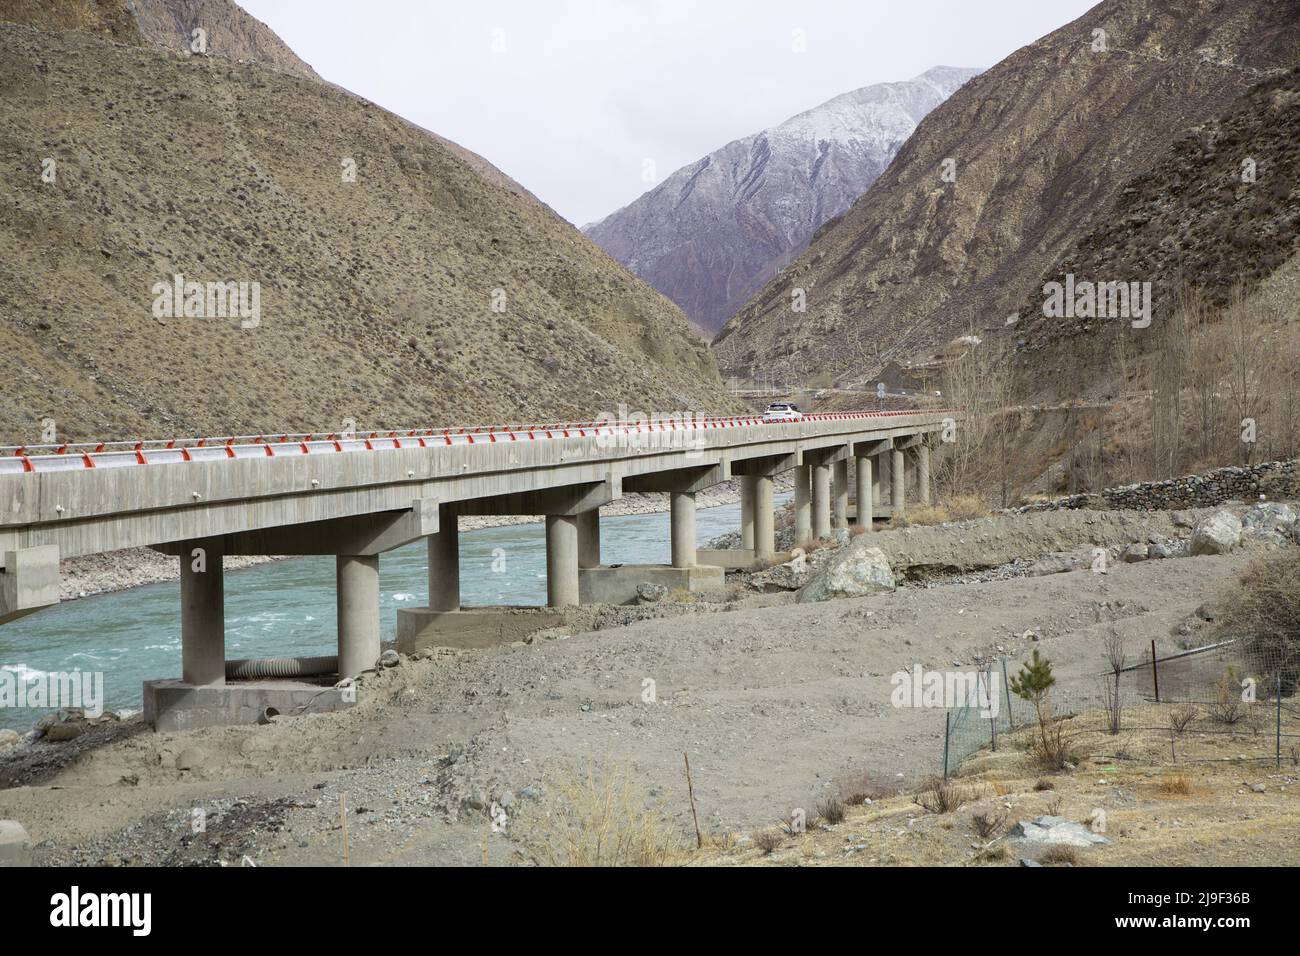 Tibet and China’s ‘Belt and Road’ Stock Photo